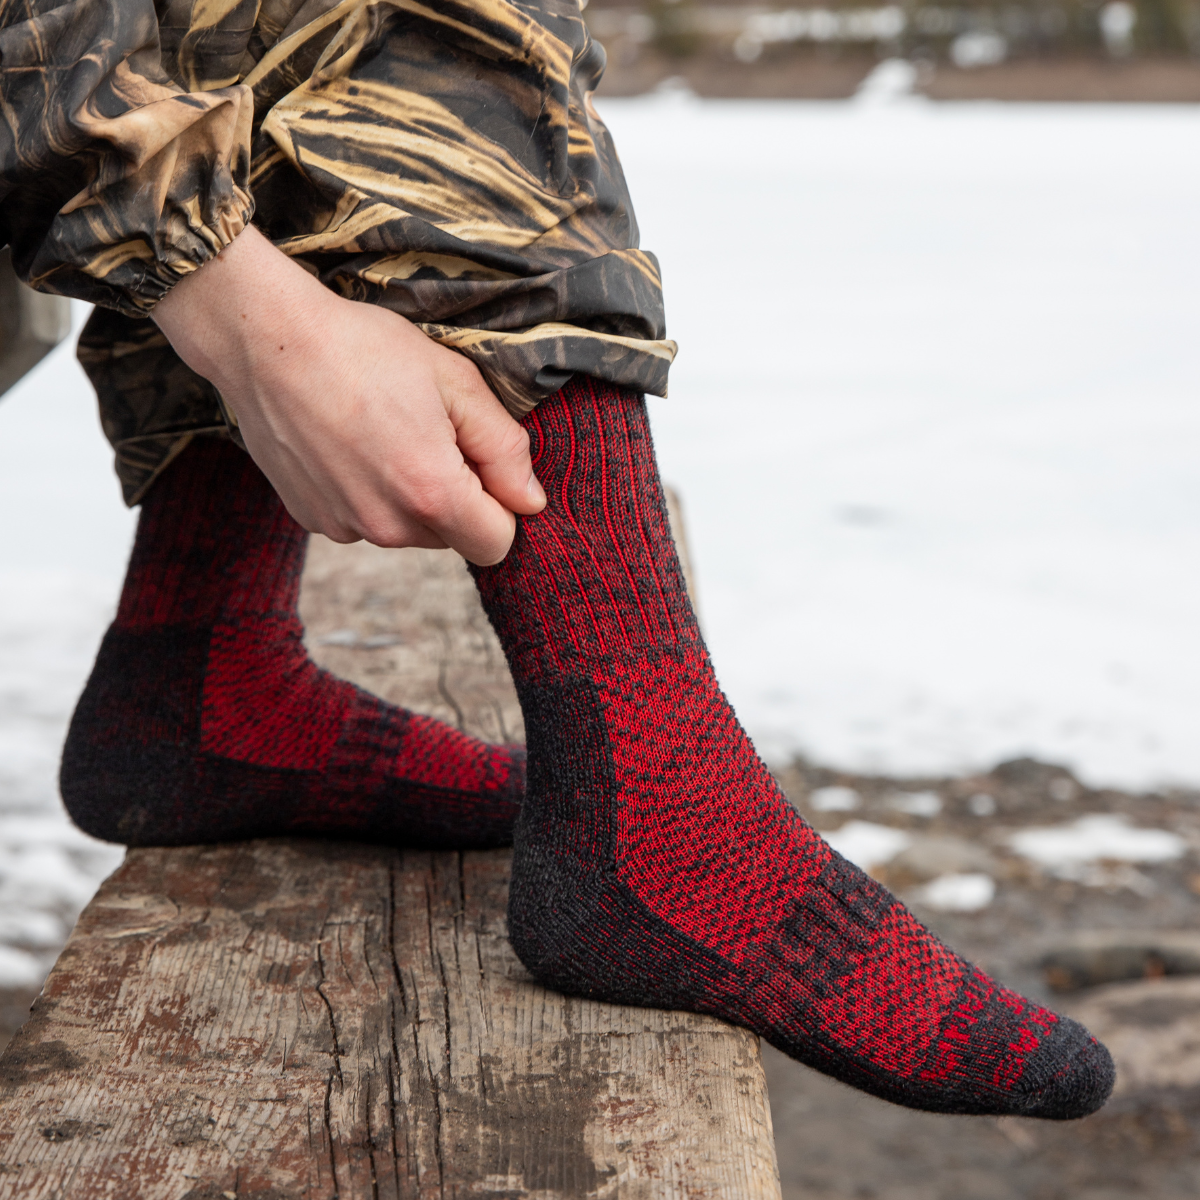 A close up of a hunter wearing camouflage sitting on a bench and pulling up a pair of Alpacas of Montana cozy soft warm comfortable thermal moisture wicking everyday winter fishing hiking snowshoeing hunting outdoors scarlet and black wine red extra cushion boot socks.